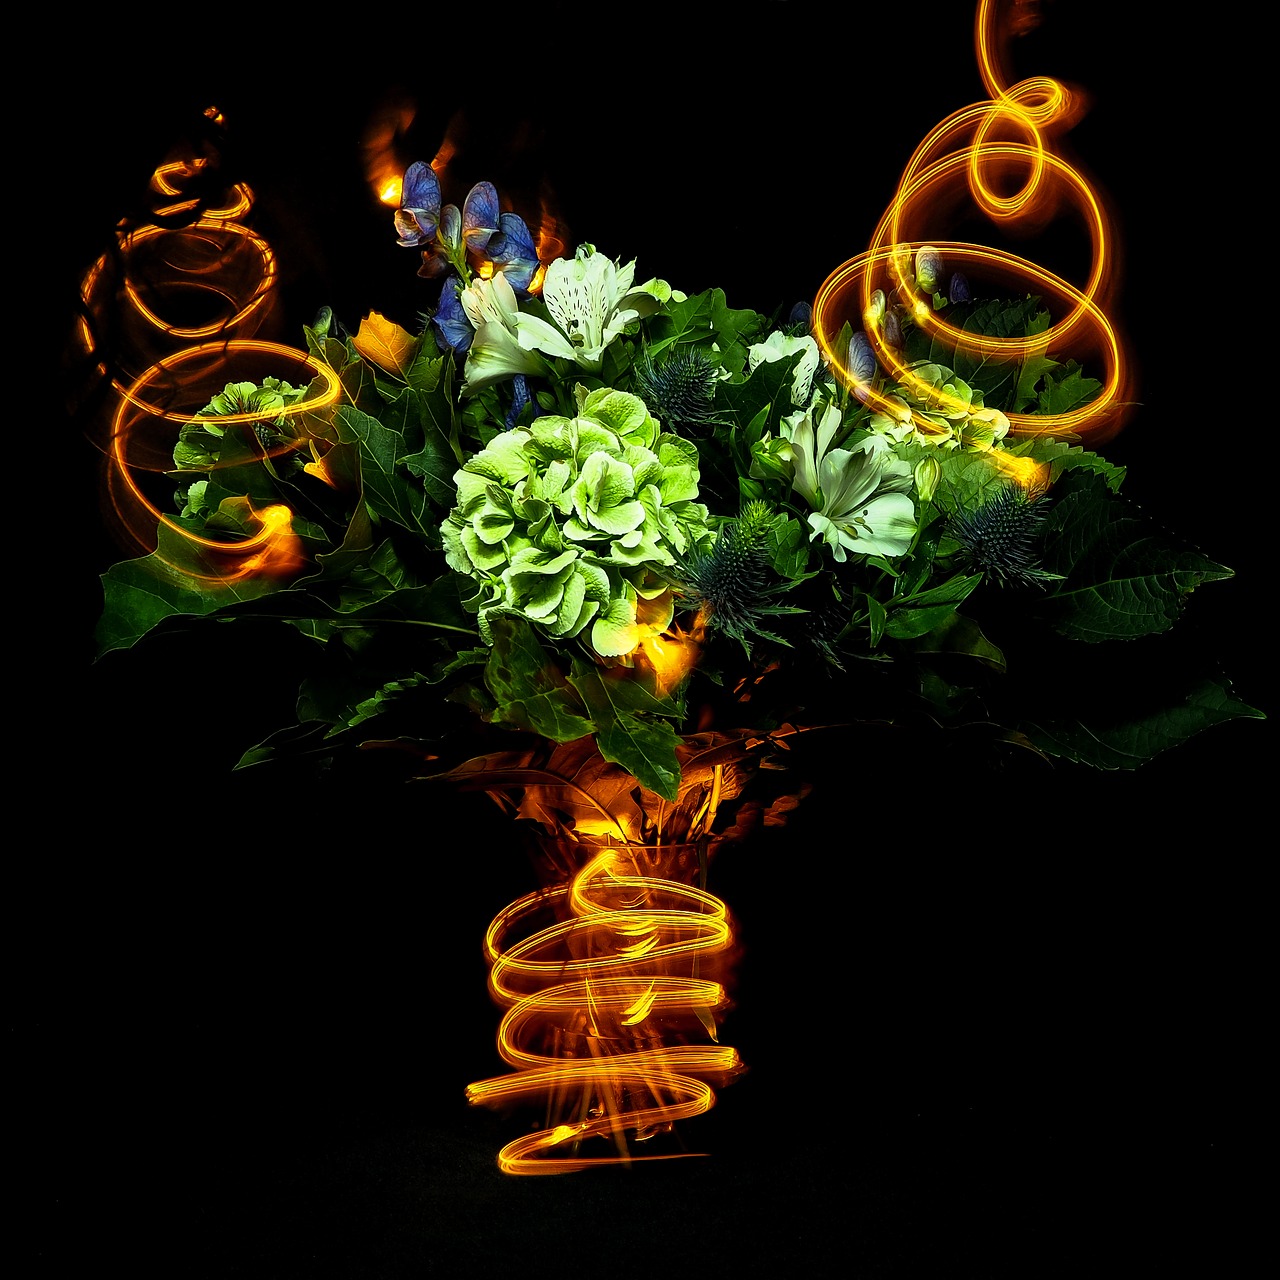 lightpainting flowers party free photo